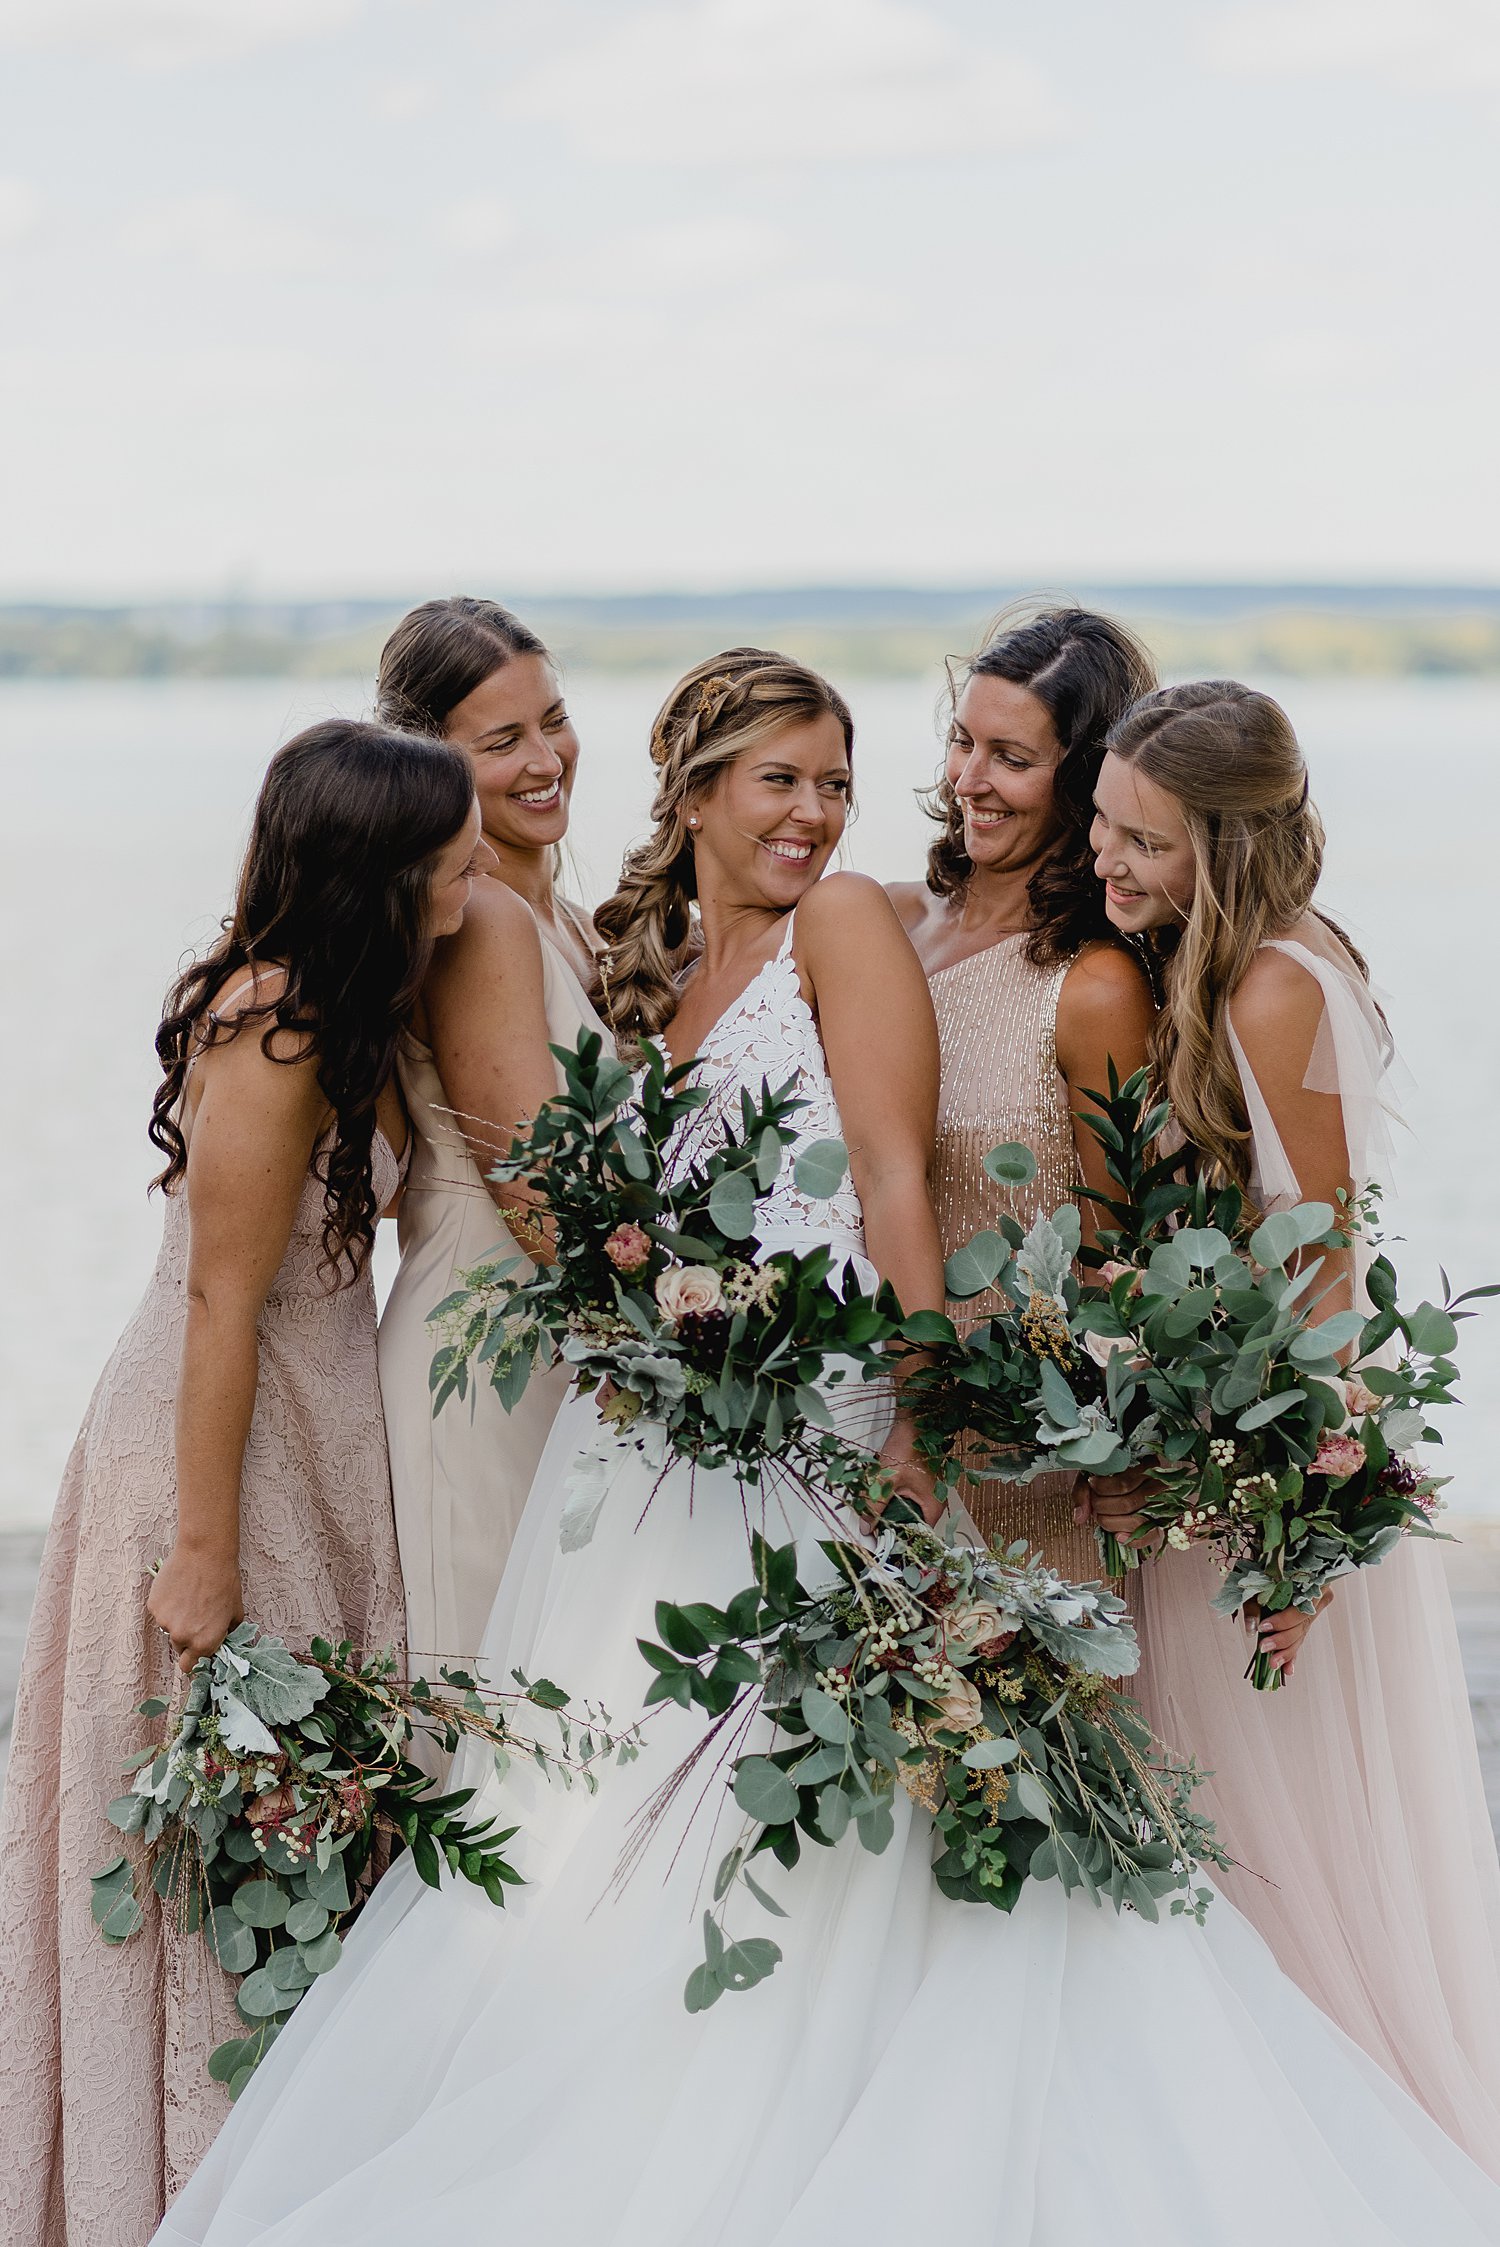 A Royal Canadian Mountie's Intimate Summer Wedding in Prince Edward County | Prince Edward County Wedding Photographer | Holly McMurter Photographs_0016.jpg